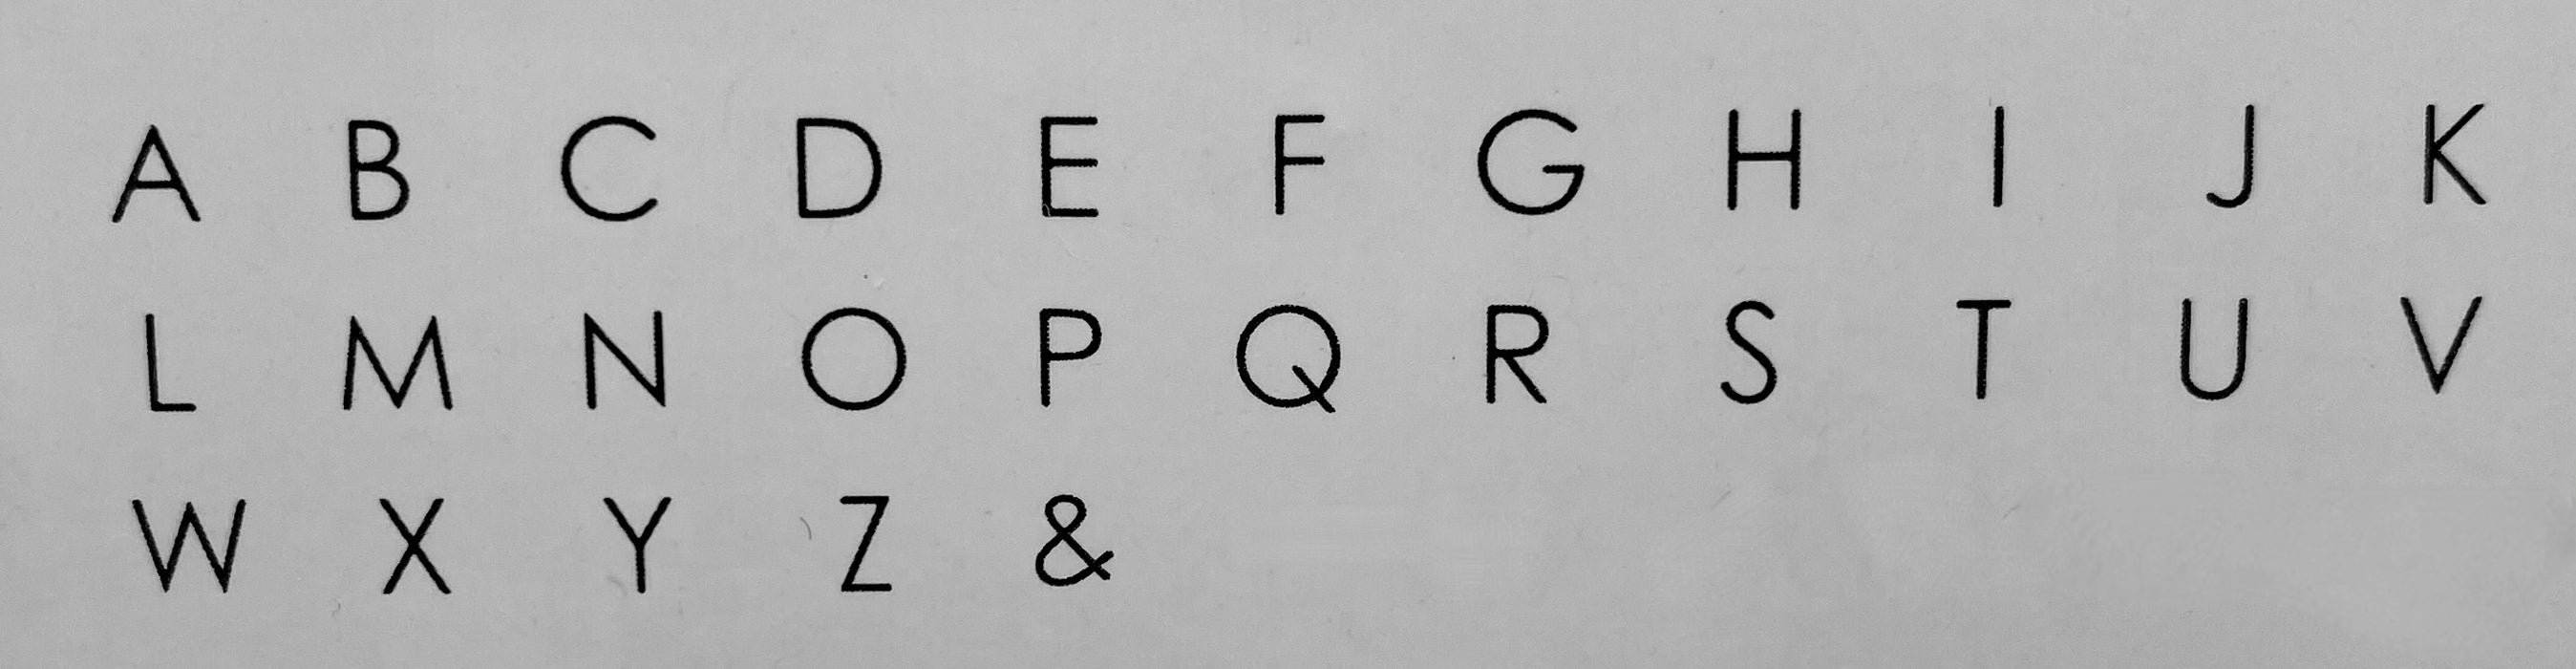 Upper cased letters. Alphabet and & symbol